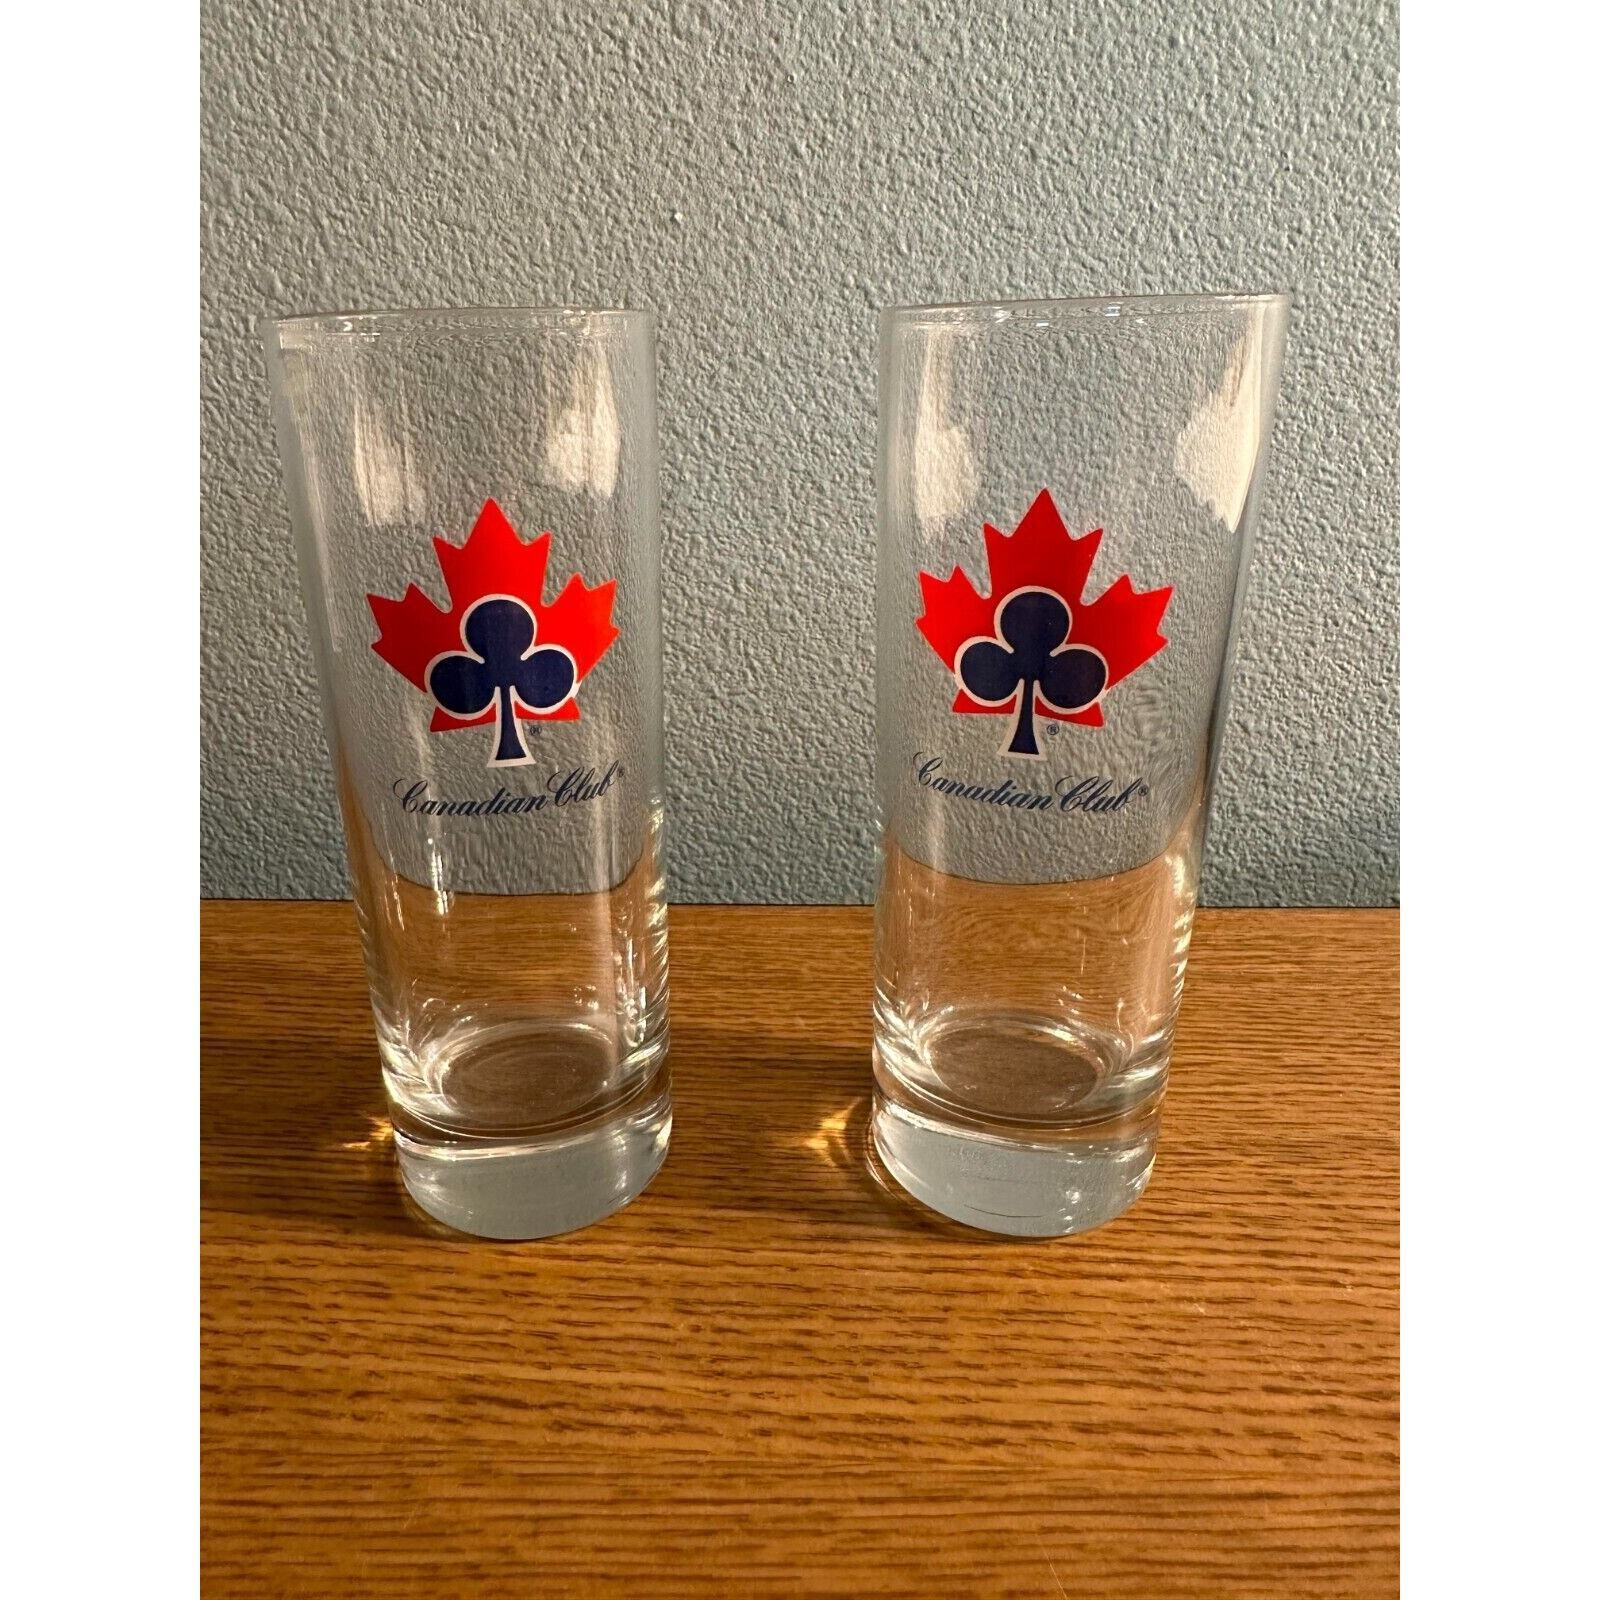 CANDIAN CLUB COCKTAIL GLASS 6” EXCELLENT CONDITION- 2 Pack- VINTAGE